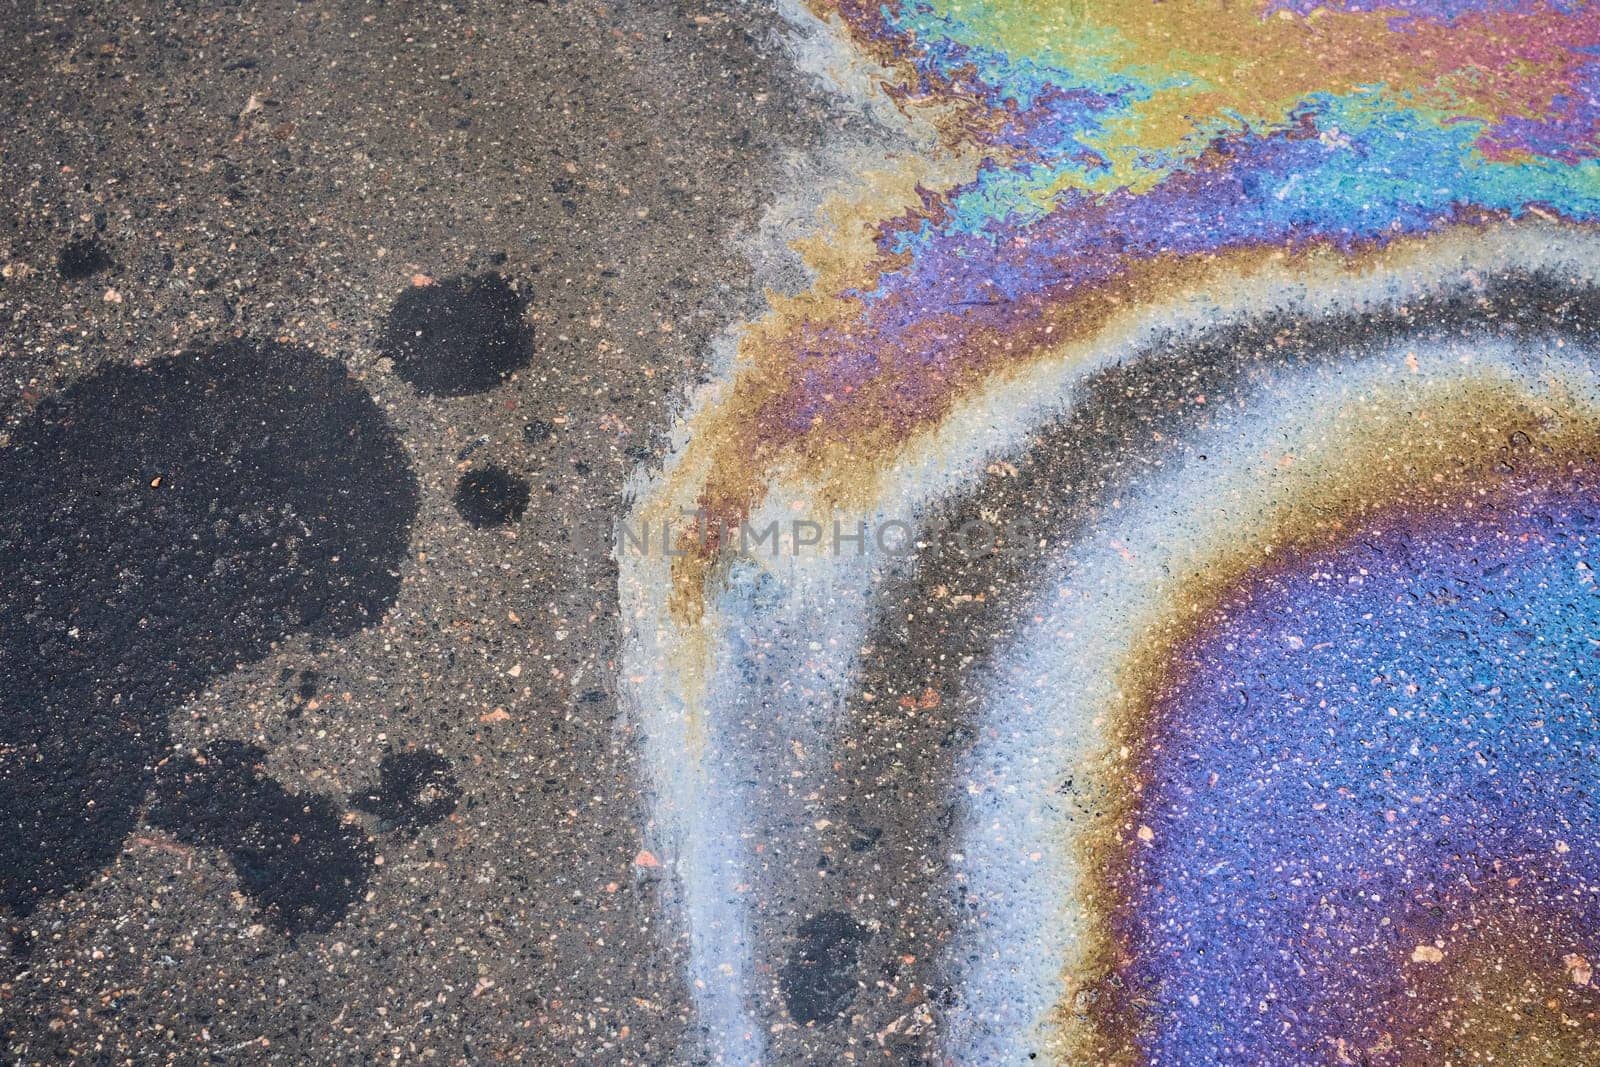 Stained Asphalt from Oil, Colorful Gasoline Fuel Marks on Road as Texture or Background by AliaksandrFilimonau